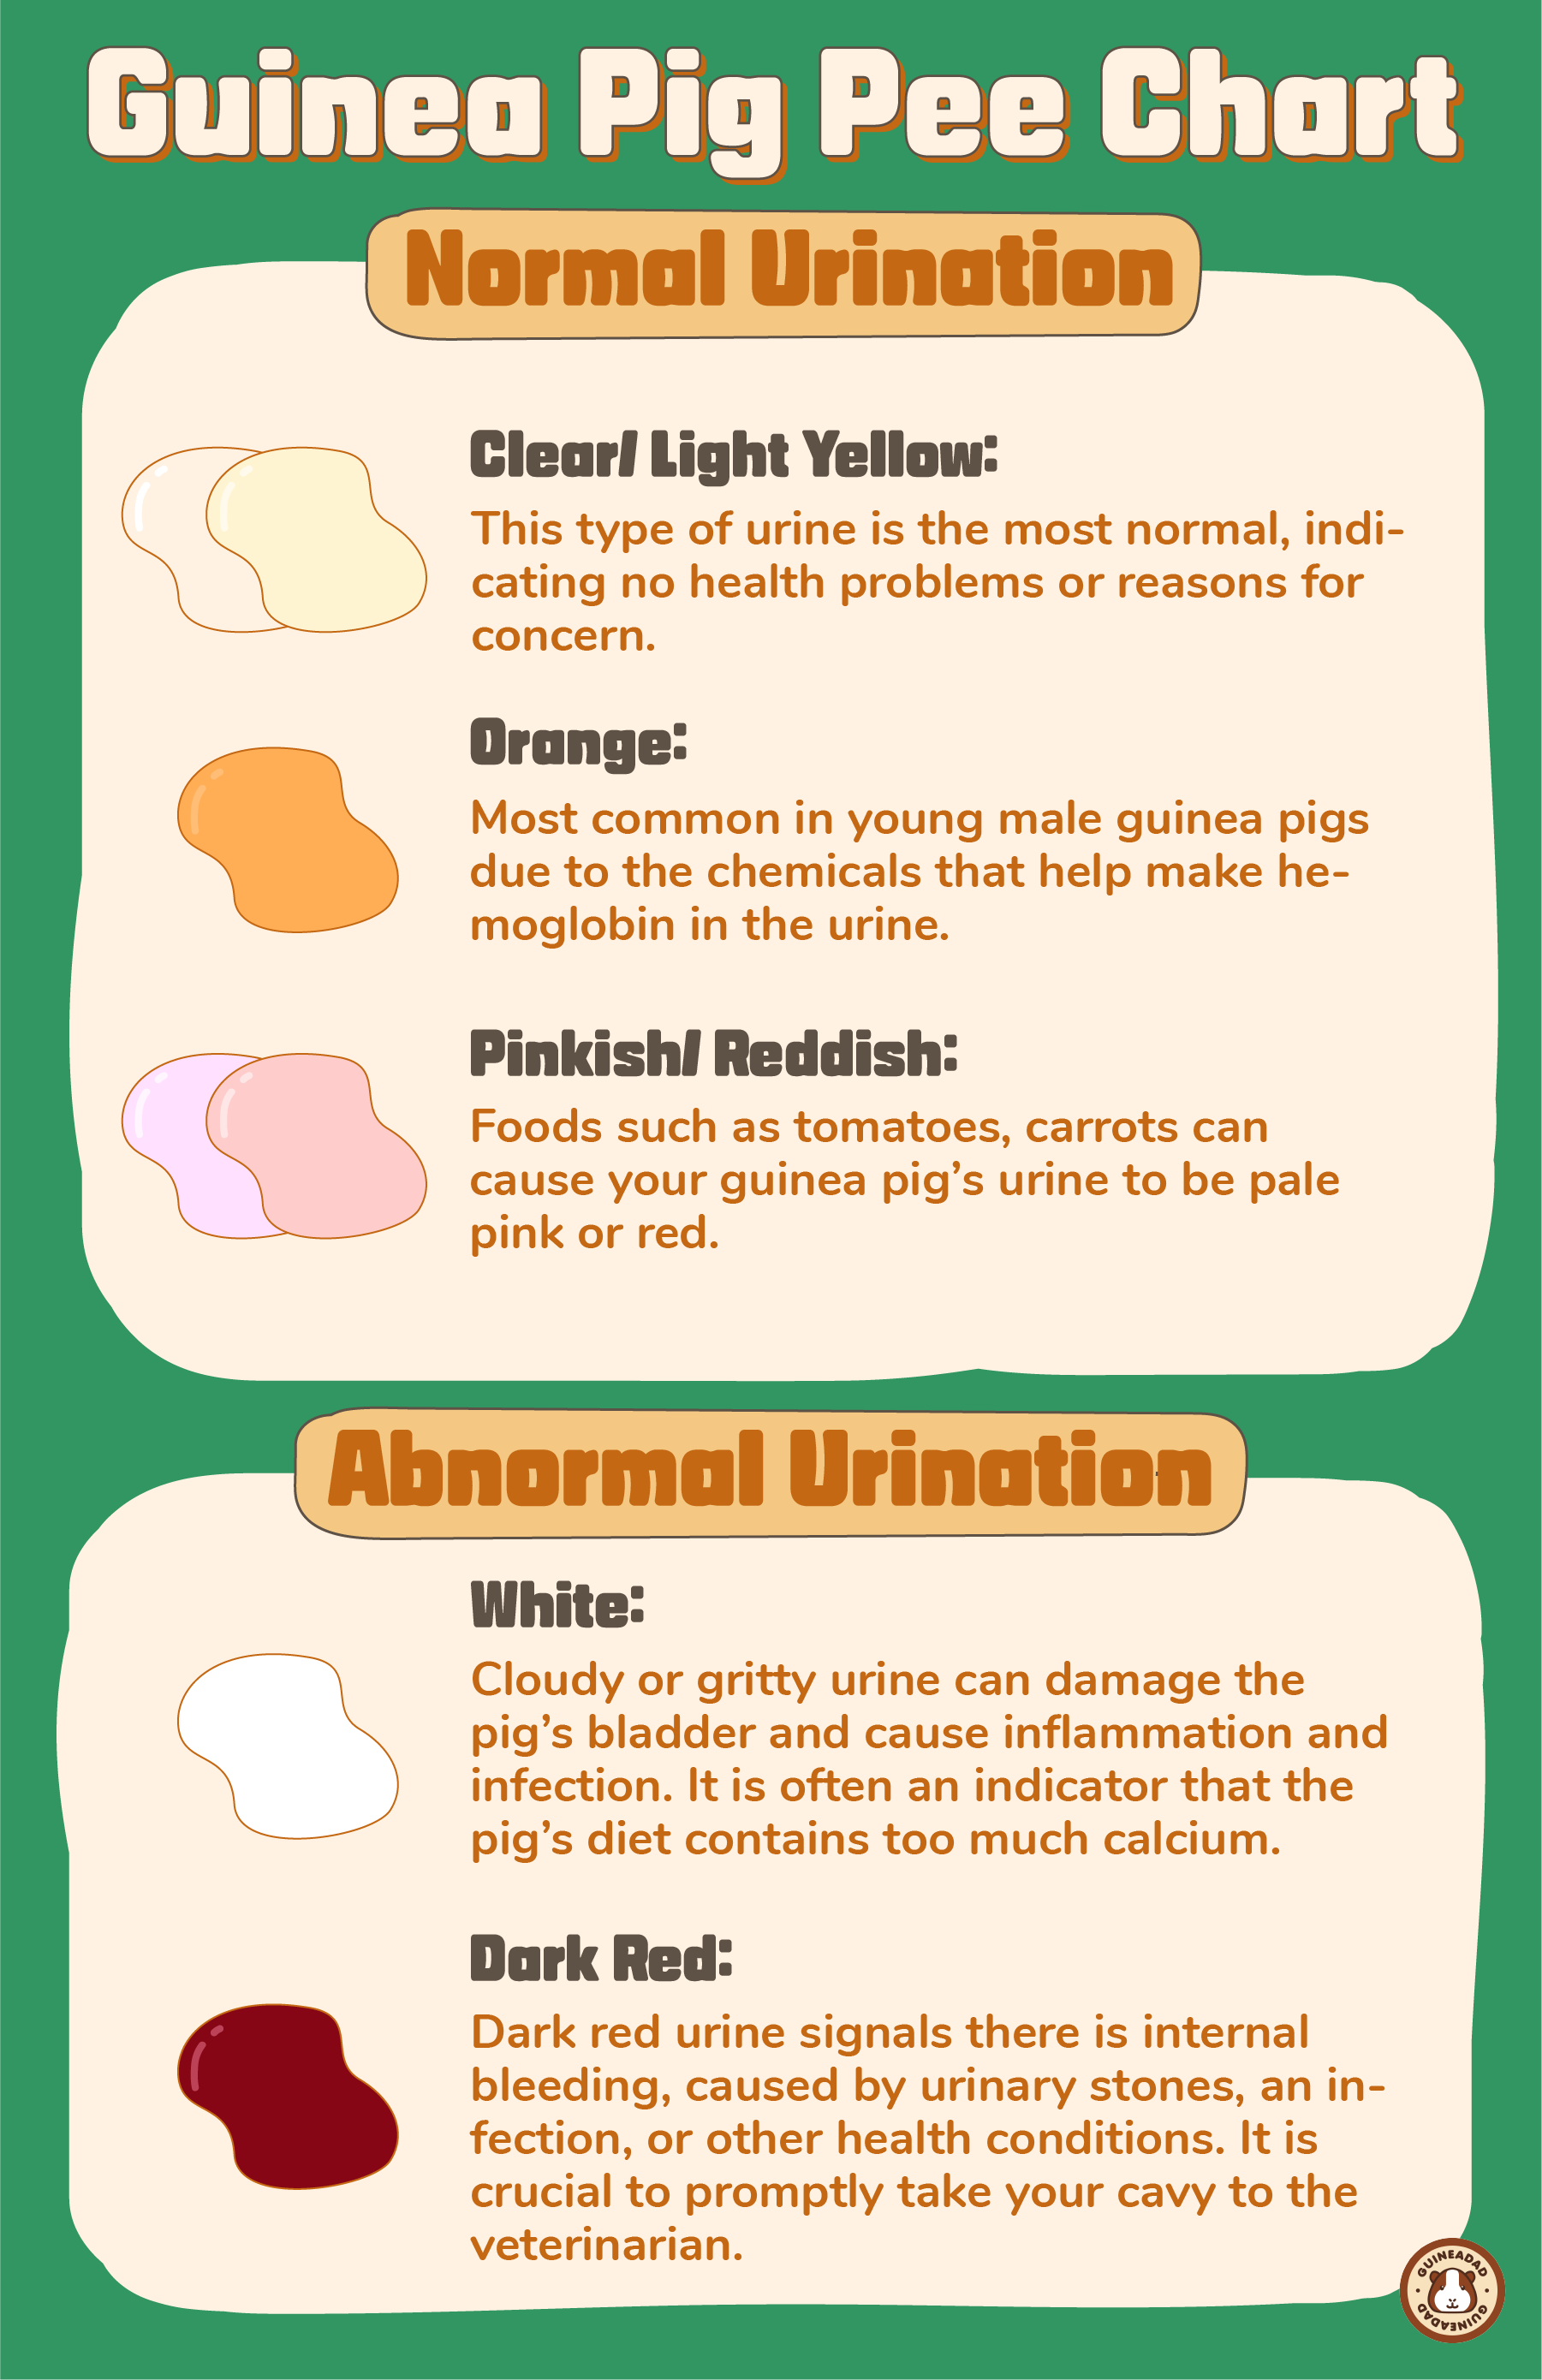 Comprehensive infographic detailing guinea pig urine colors and textures, indicating health conditions such as normal, dehydration, and diseases including UTI, stones, and dietary imbalances. Includes descriptions of clear, yellow, orange, pink, white, and red urine with health implications.